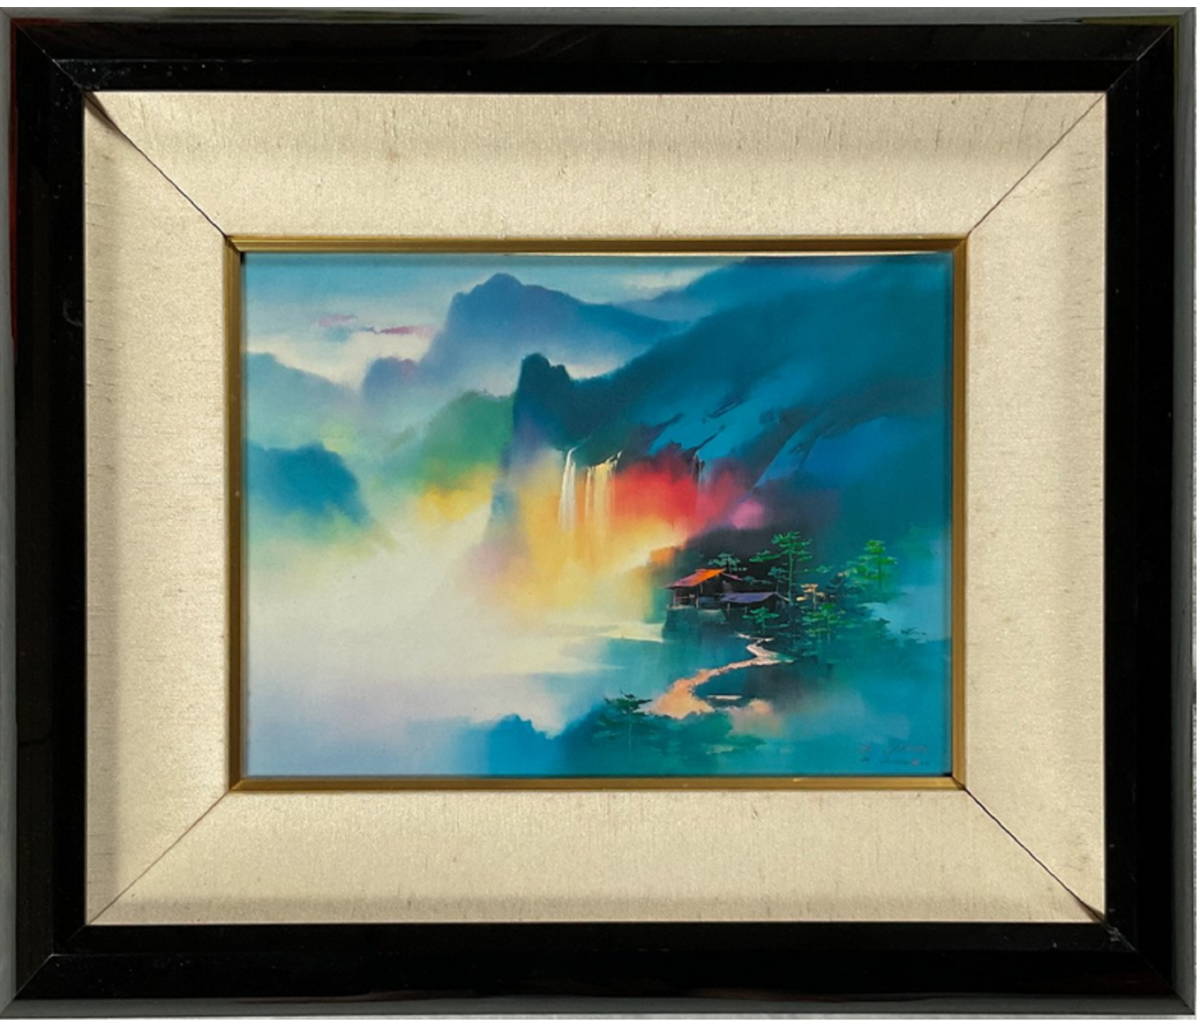 Guaranteed Authenticity Liang Shubang Chinese Painter Size 4 Handwritten Ink Painting Masterpiece Framed Painting Comes with Box Framed Chinese Fine Art Oil Painting Ink Watercolor 0203, painting, Japanese painting, landscape, Fugetsu